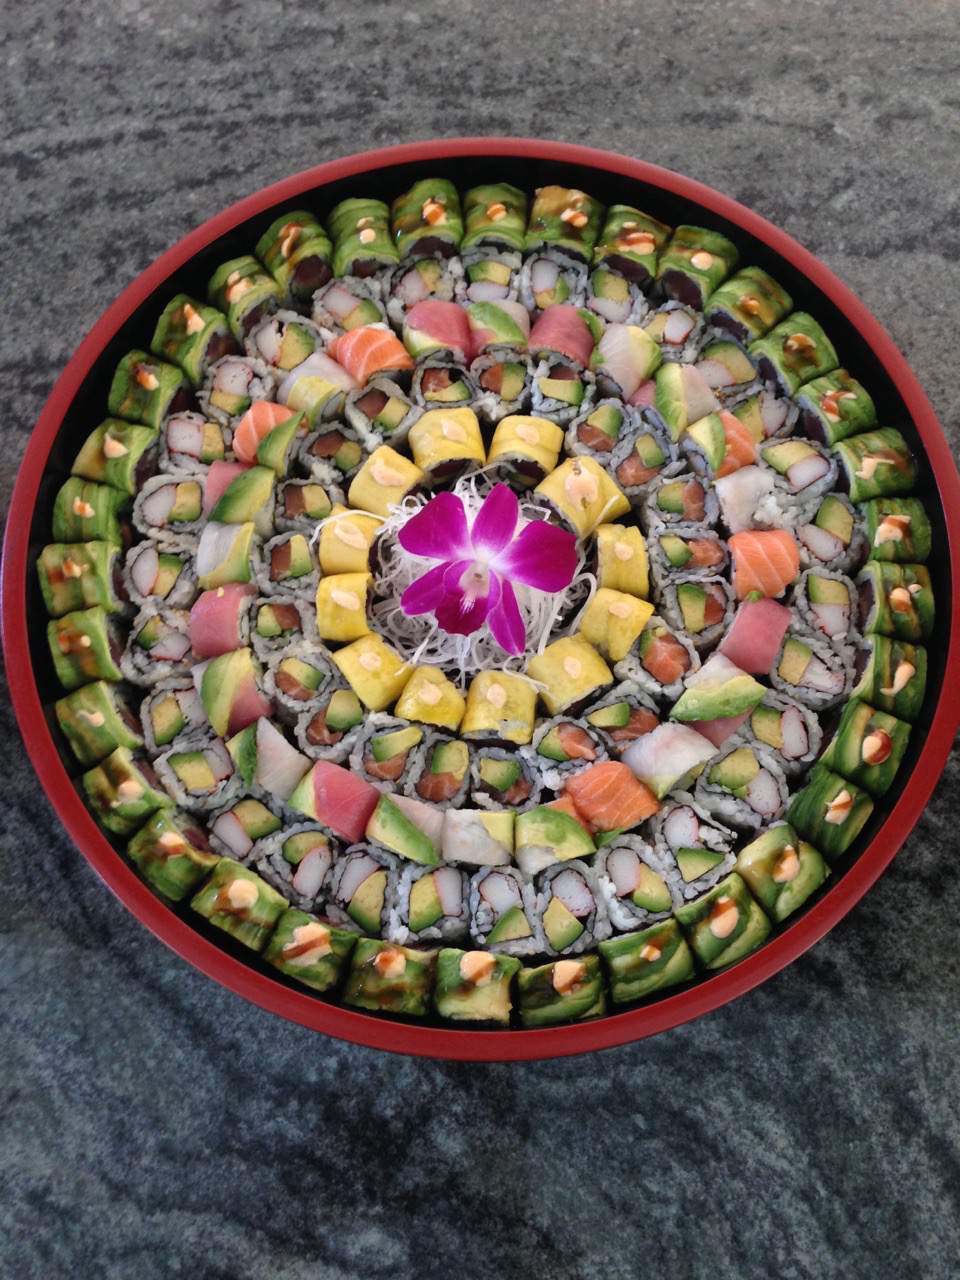 A platter of specialty sushi rolls from Seaside House in Montauk